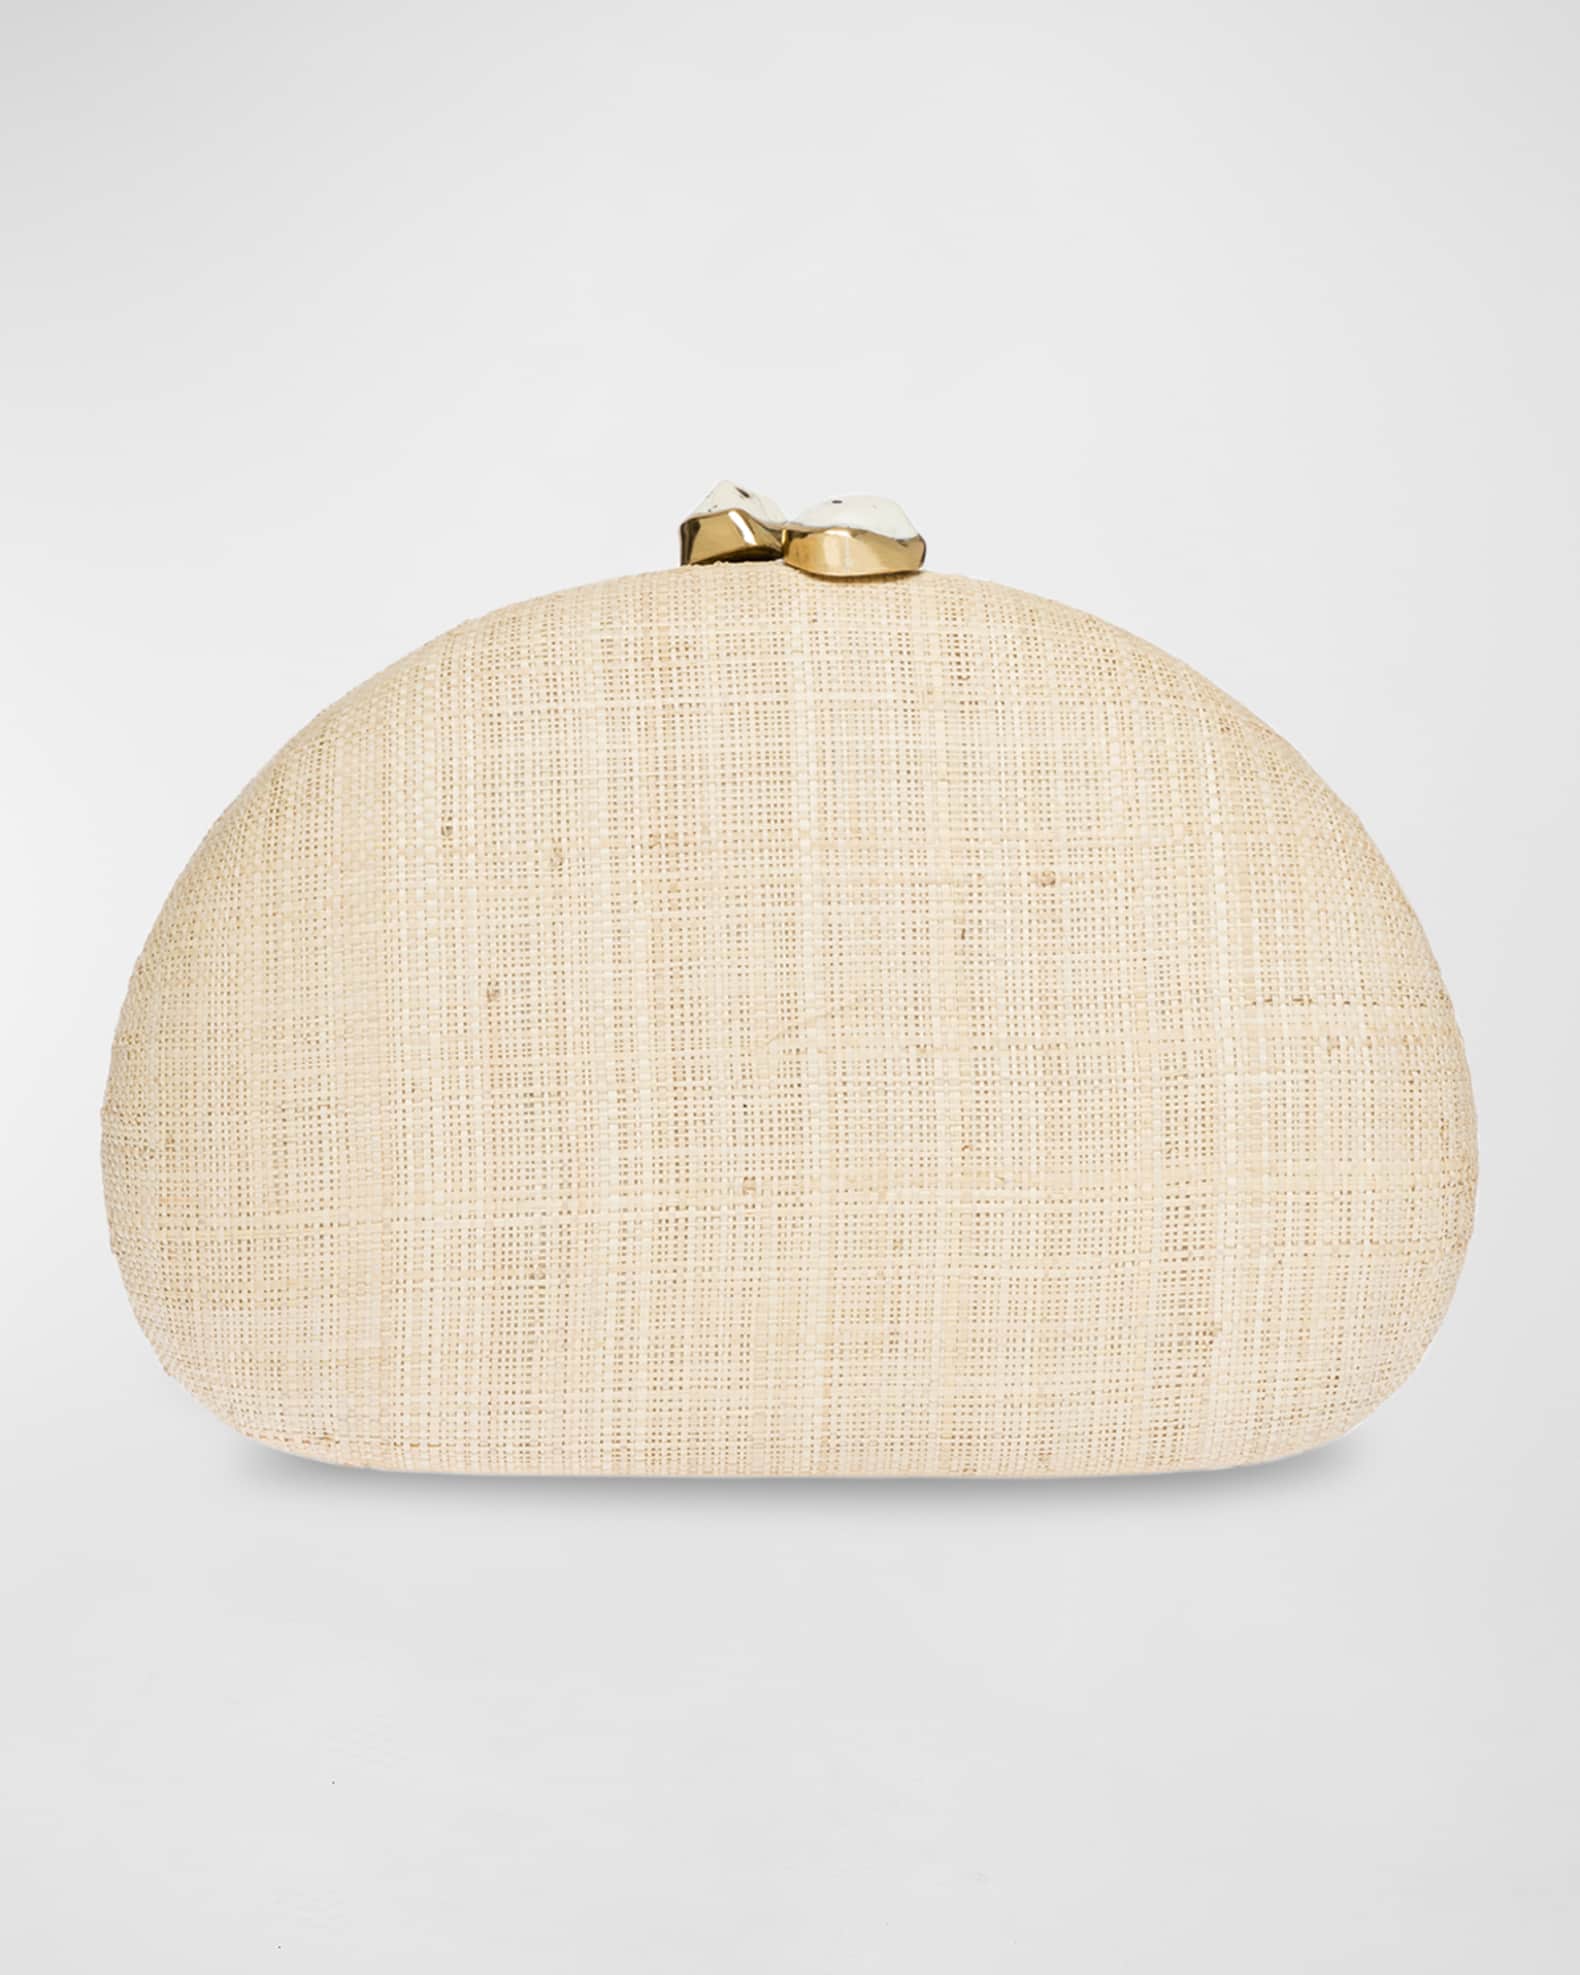 Rafe Berna Embroidered Palm Leaves Straw Clutch Bag | Neiman Marcus